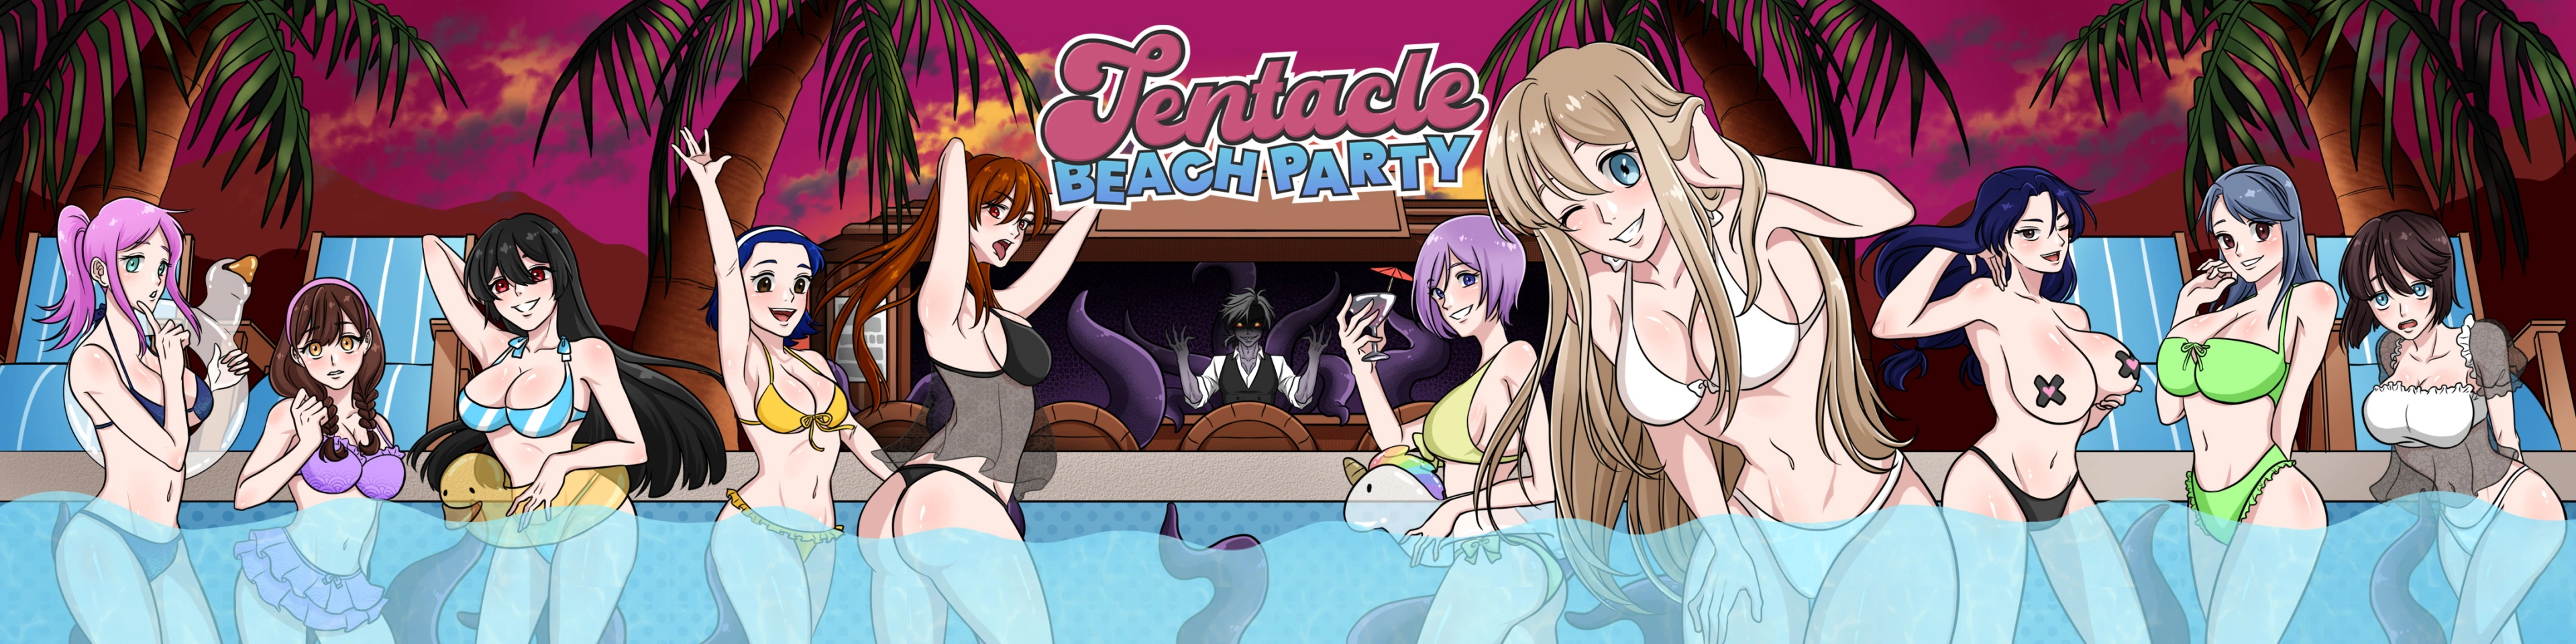 Tentacle Beach Party main image